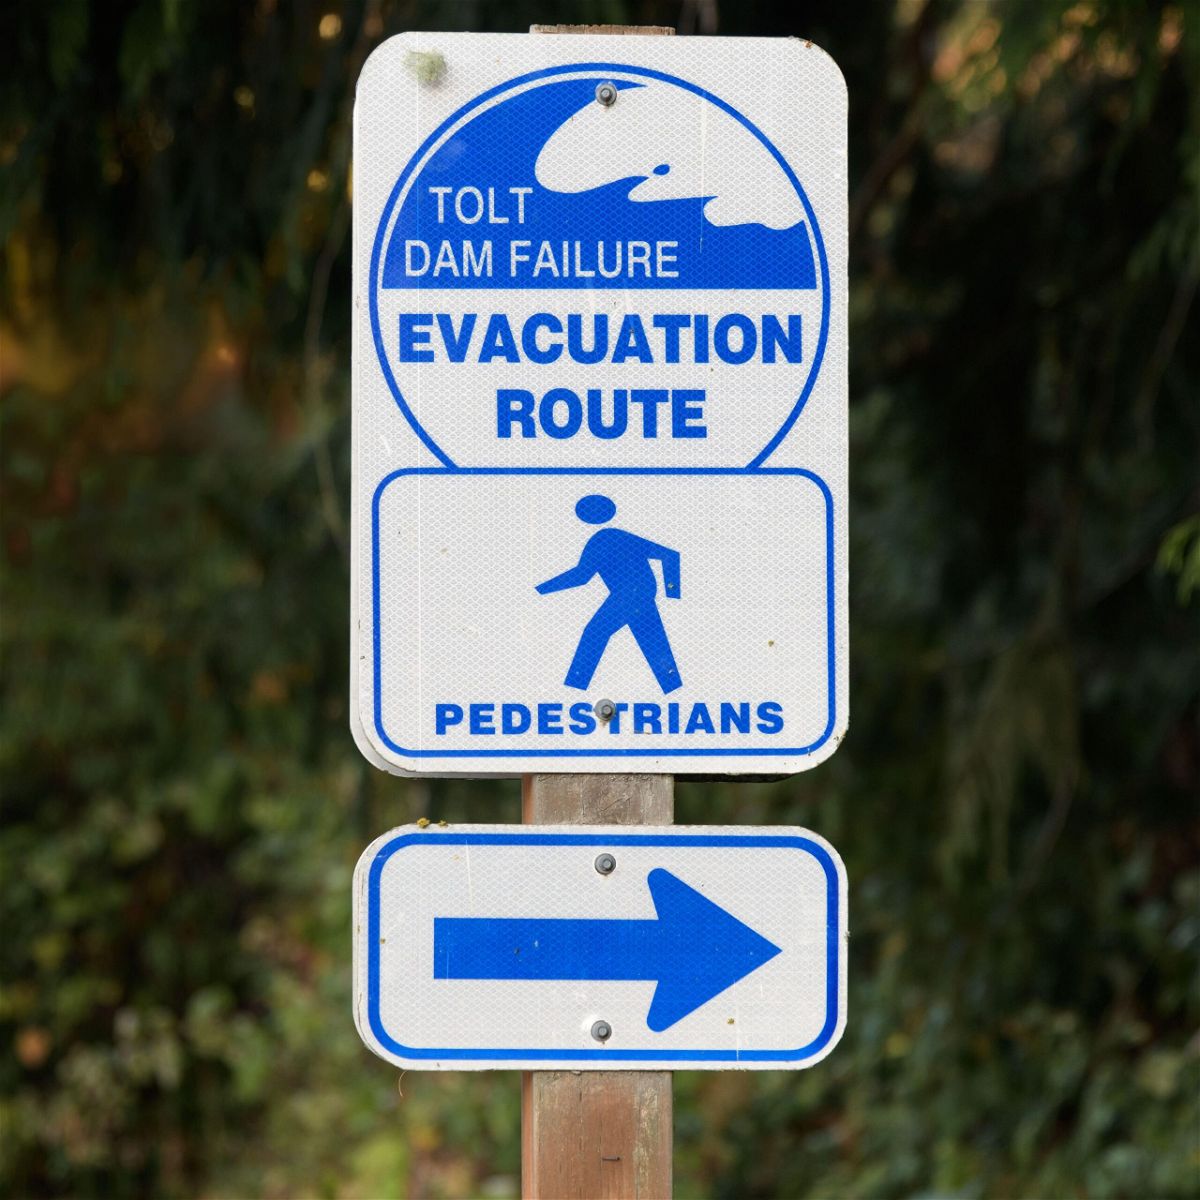 <i>Ian Dewar/Alamy</i><br/>A pedestrian evacuation sign points the way to an escape in case of a failure of the Tolt Dam in Carnation